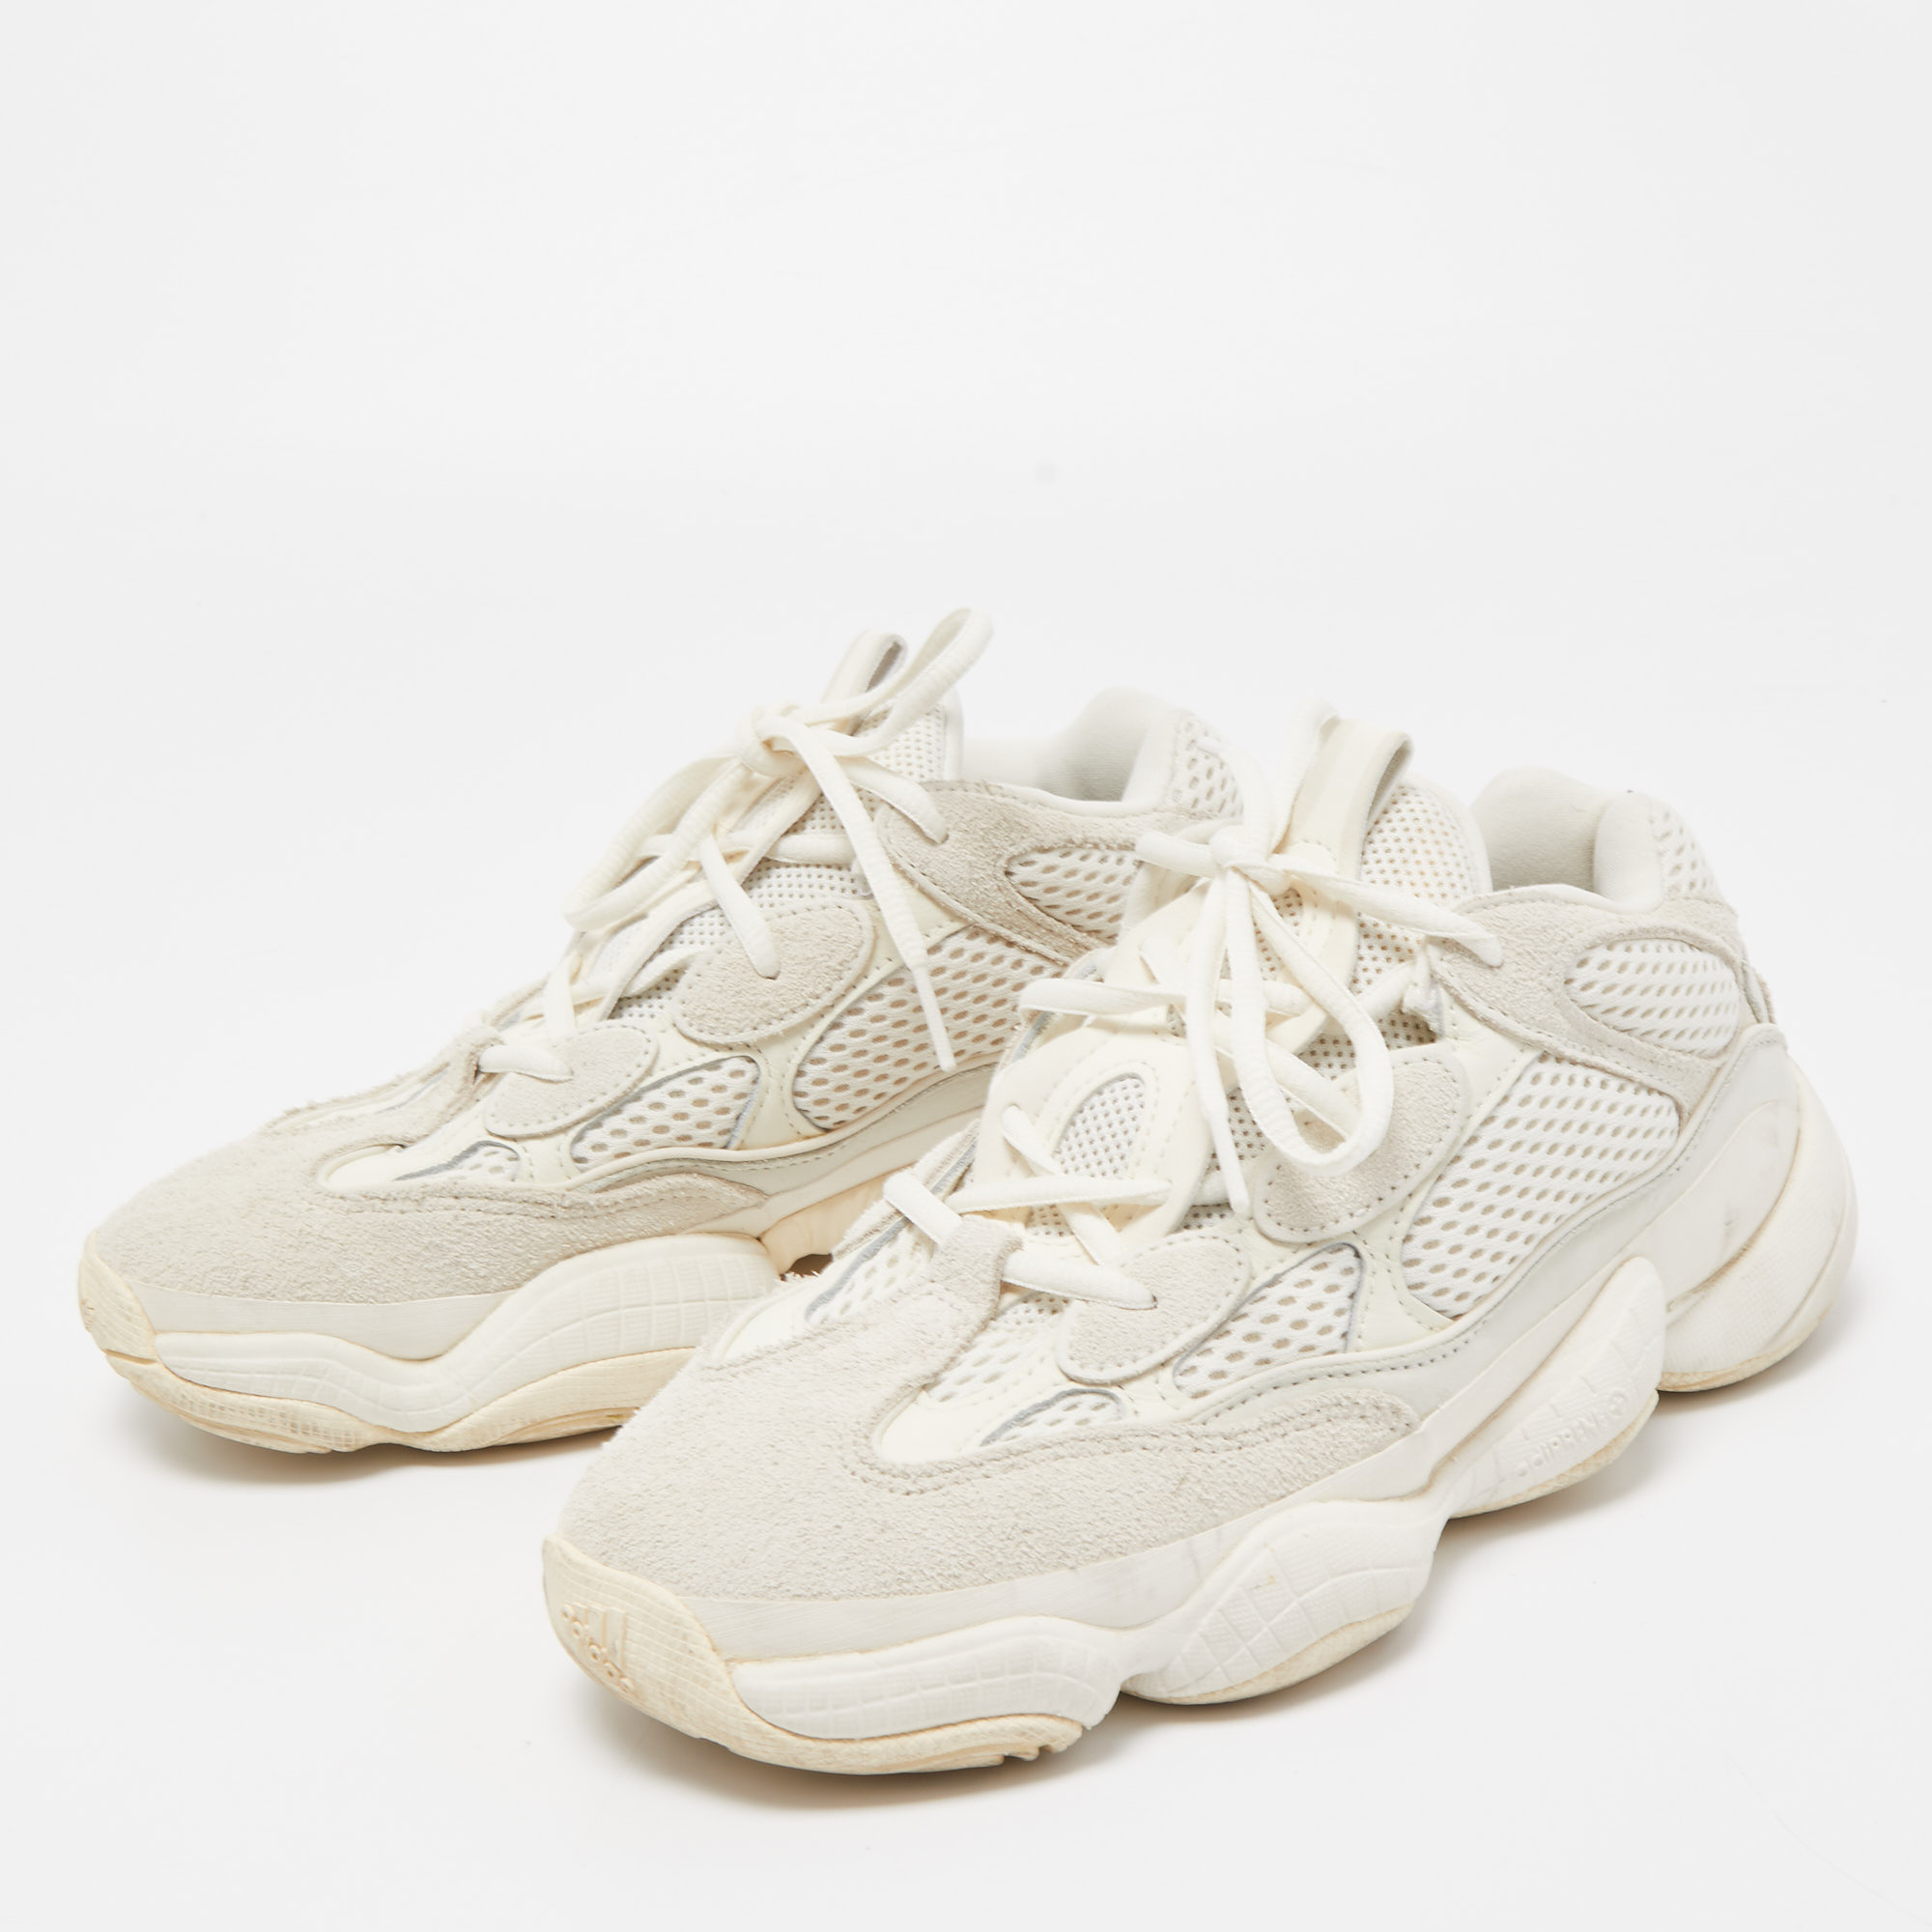 

Yeezy x Adidas White Suede and Mesh 500 Bone White Sneakers Size 38 2/3